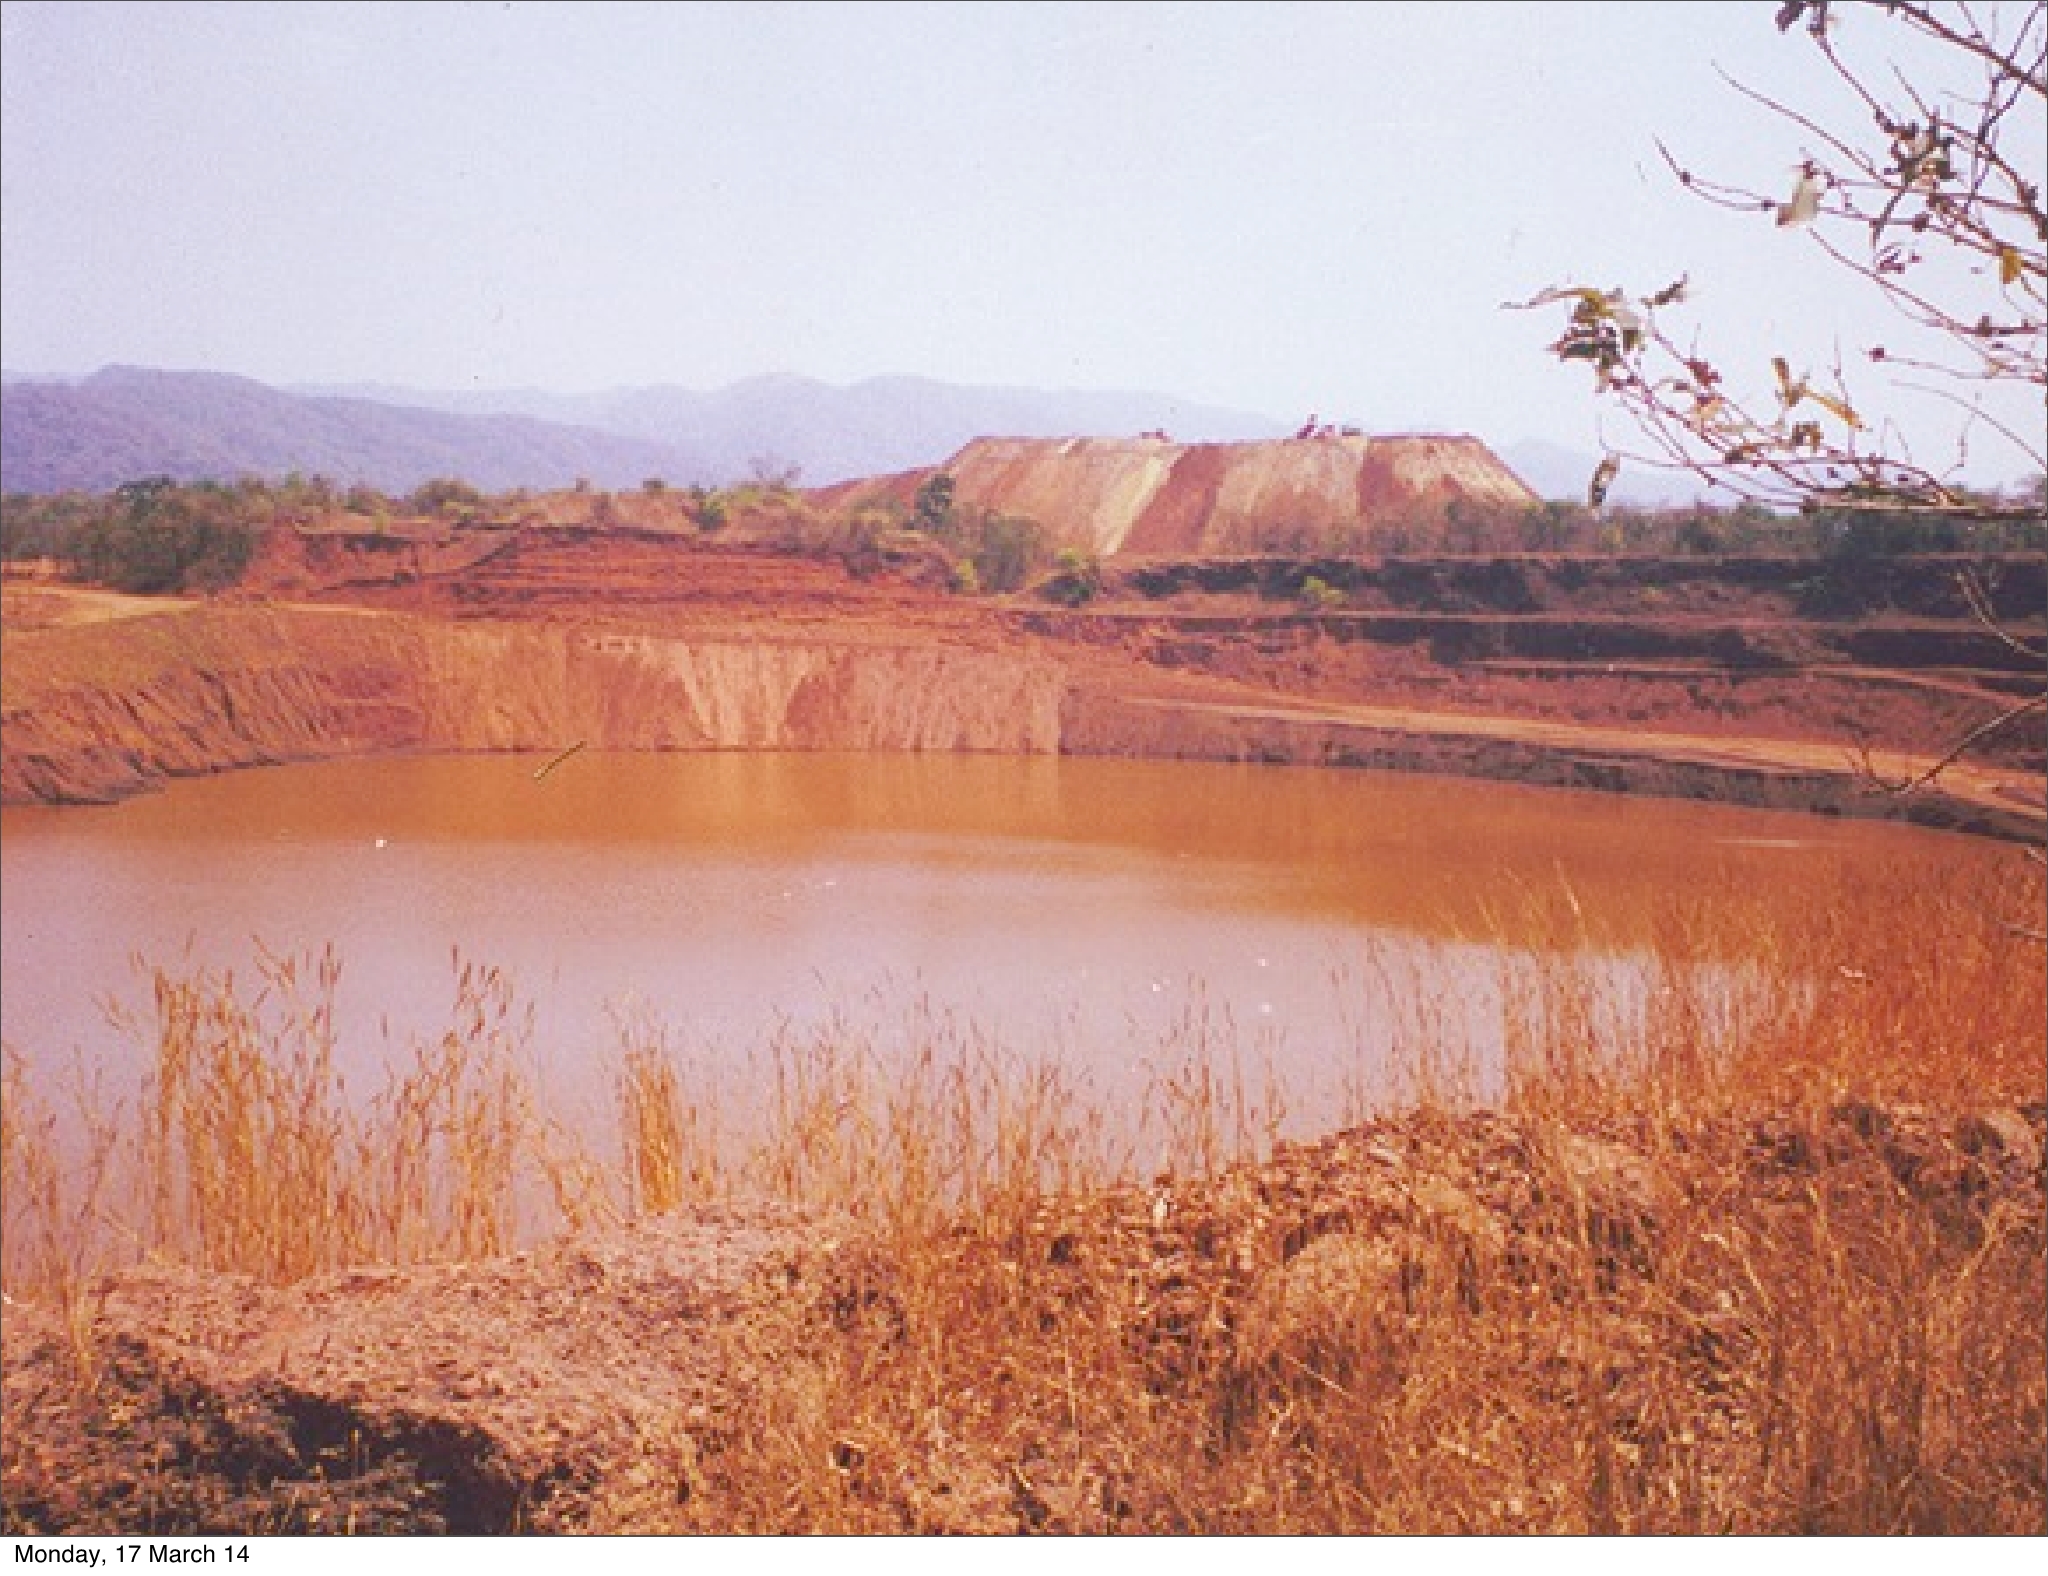 Mining dump in the background, red polluted water in the foreground